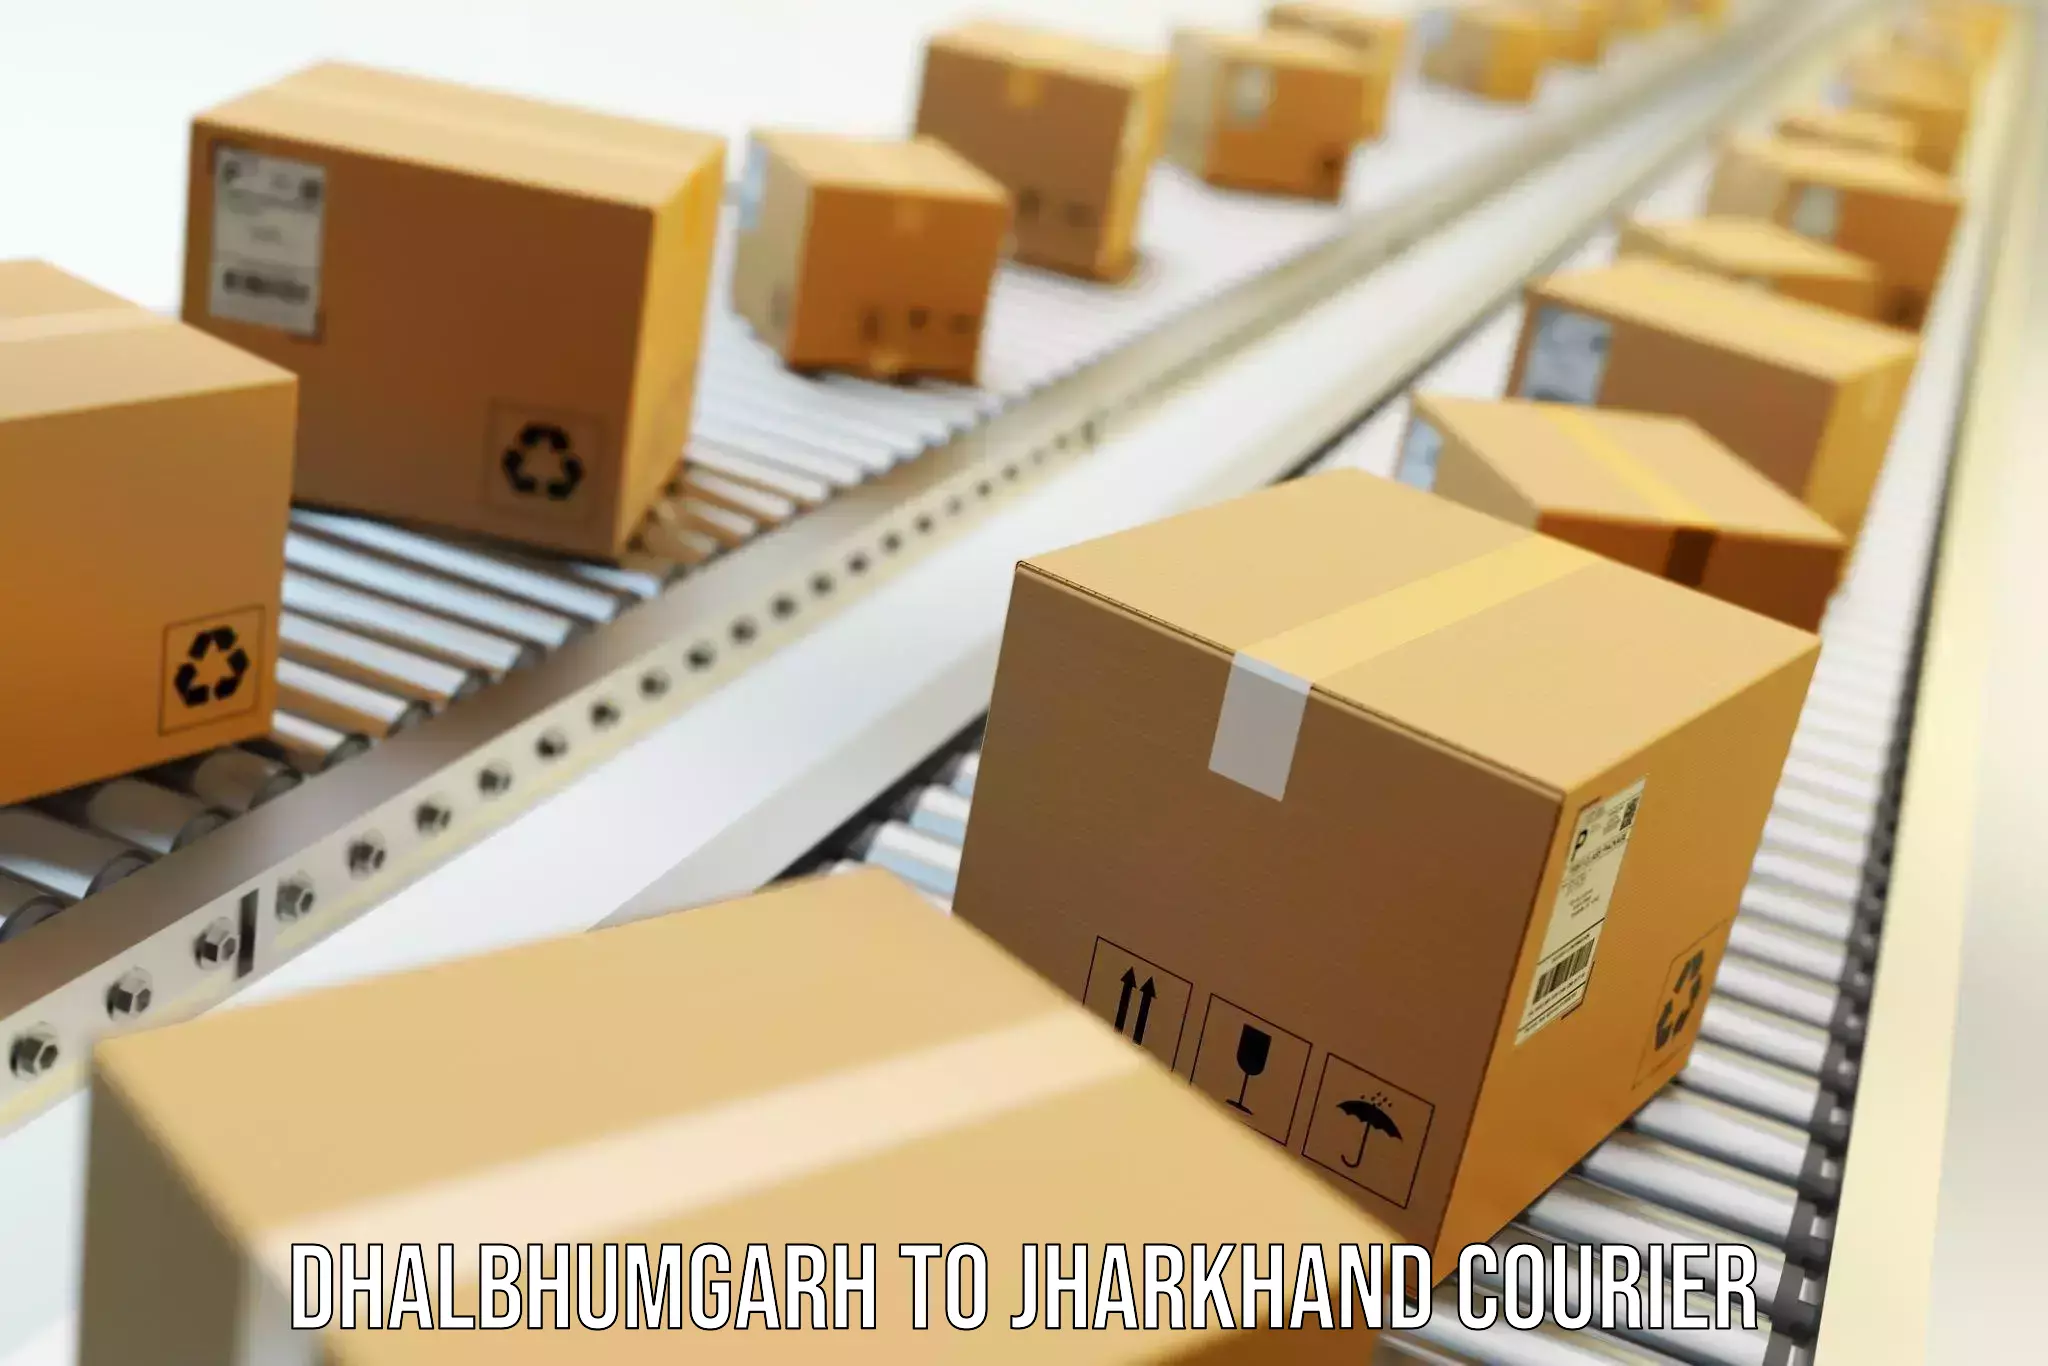 Efficient packing services Dhalbhumgarh to Hazaribagh